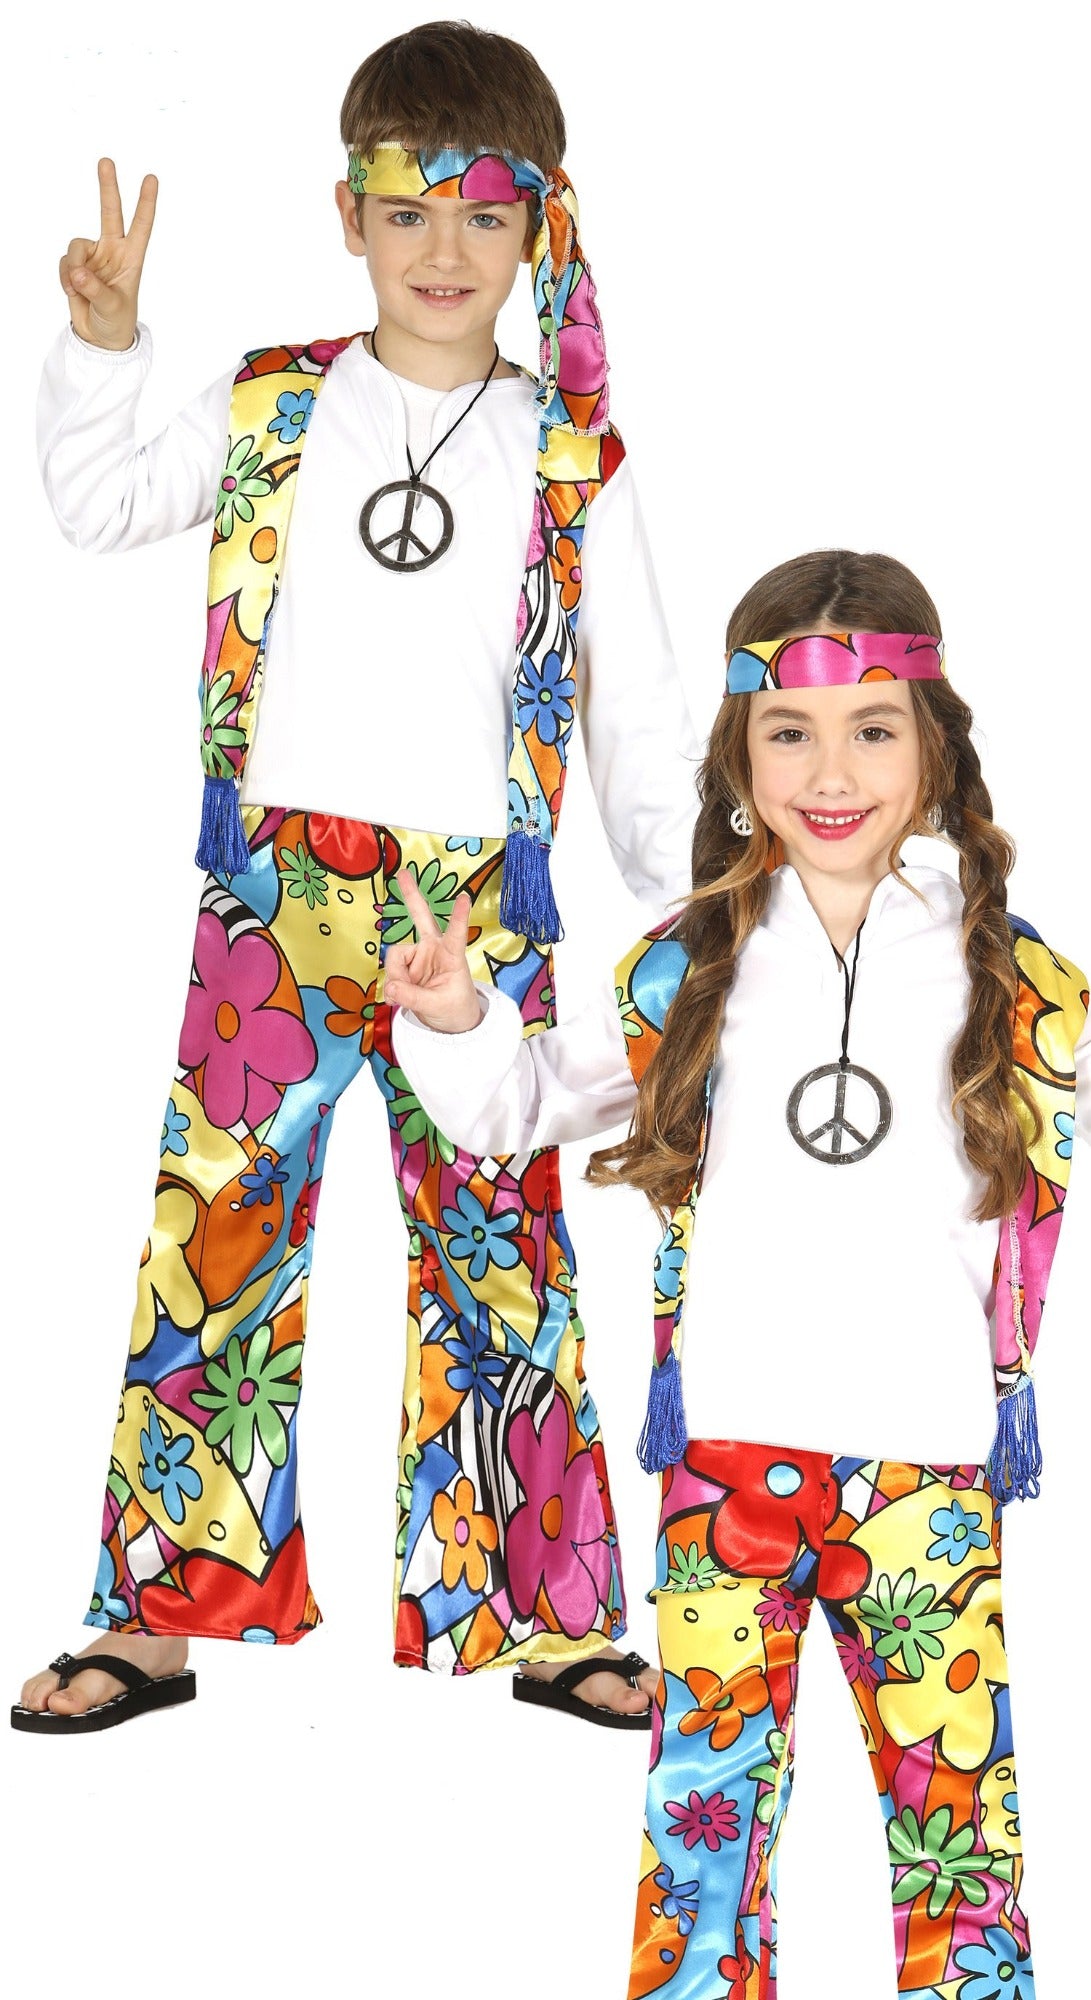 The 1960's Hippie children's outfit for boys and girls.